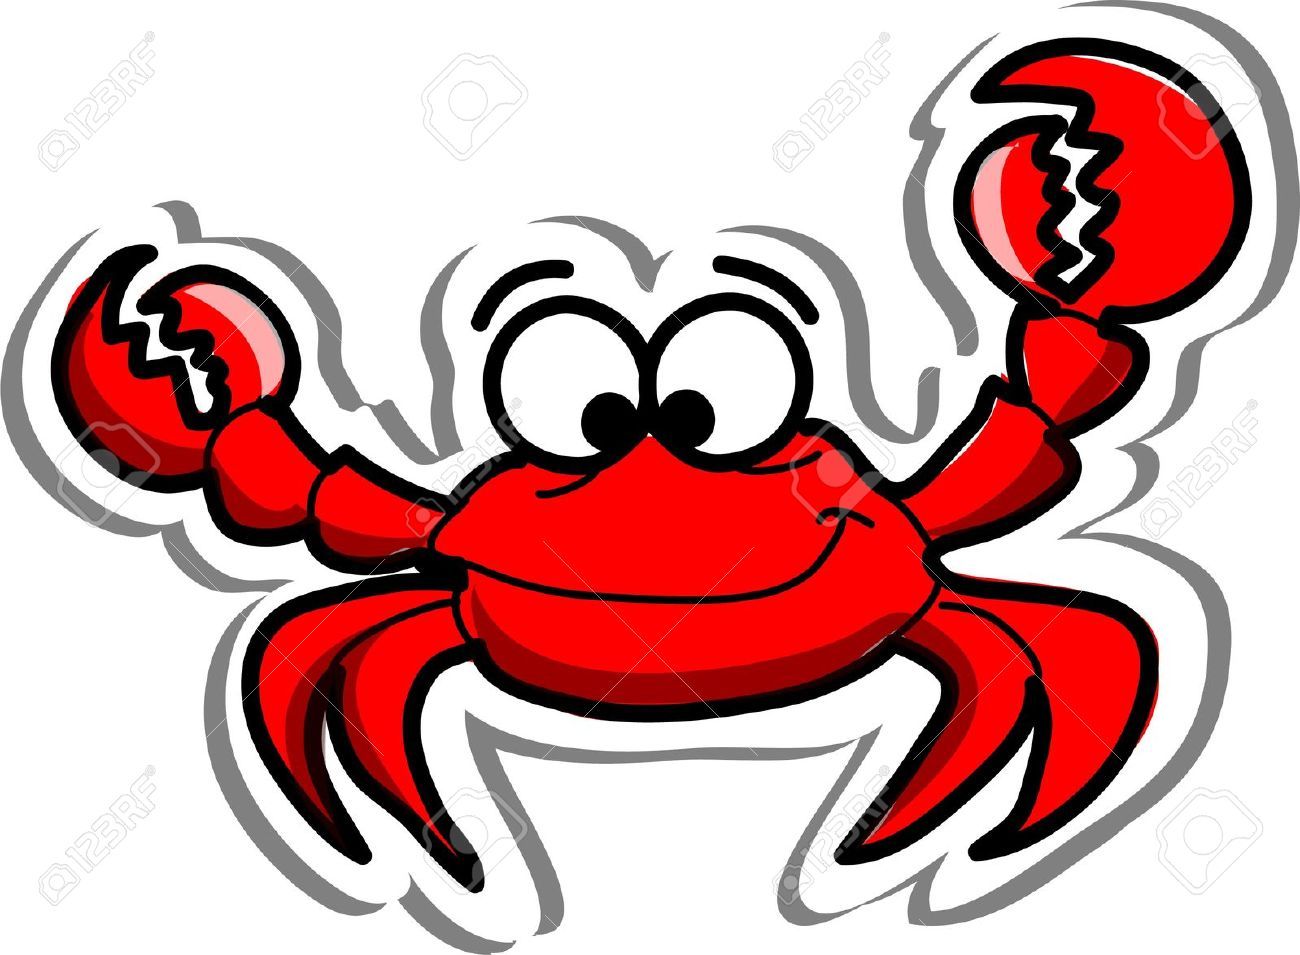 Crabs Stock Illustrations, Cliparts And Royalty Free Crabs